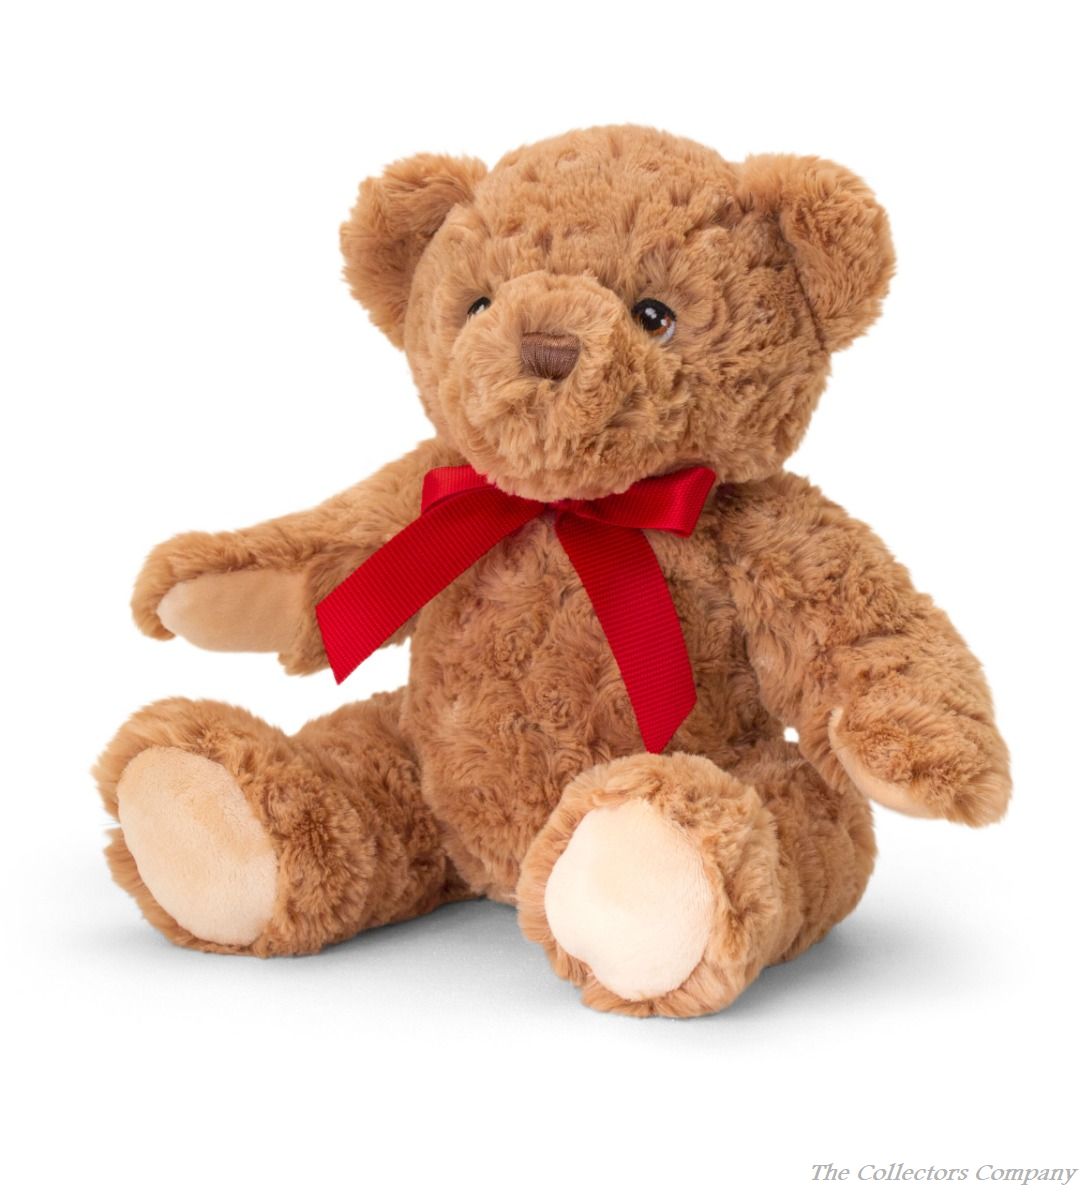 Keeleco Teddy Bear 25cm by Keel Toys SE6359 - made of recycled plastic bottles